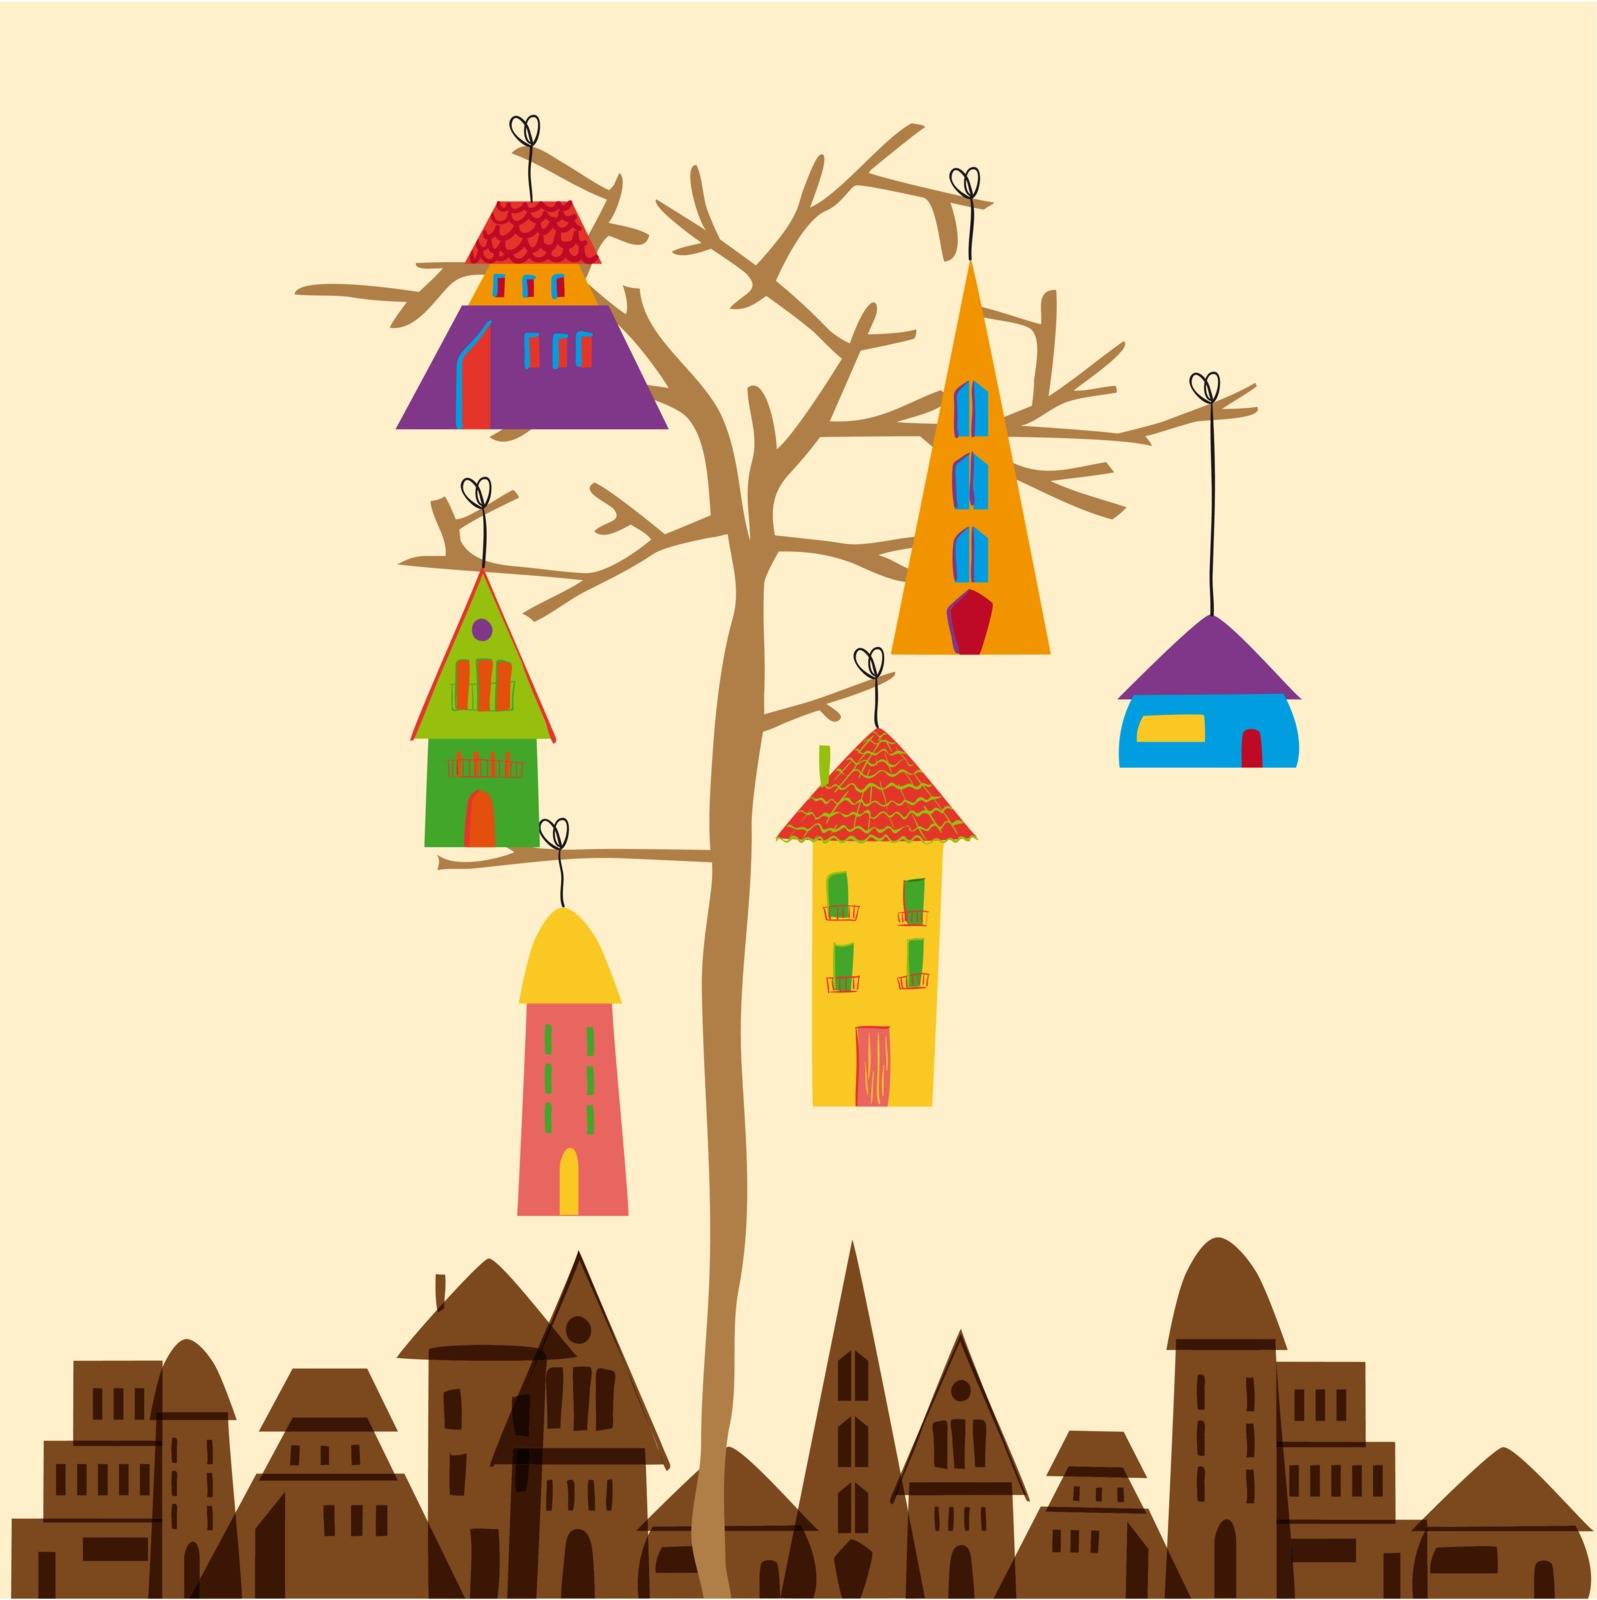 Multicolored transparent town in a tree. EPS10 file version. This illustration contains transparencies and is layered for easy manipulation and custom coloring